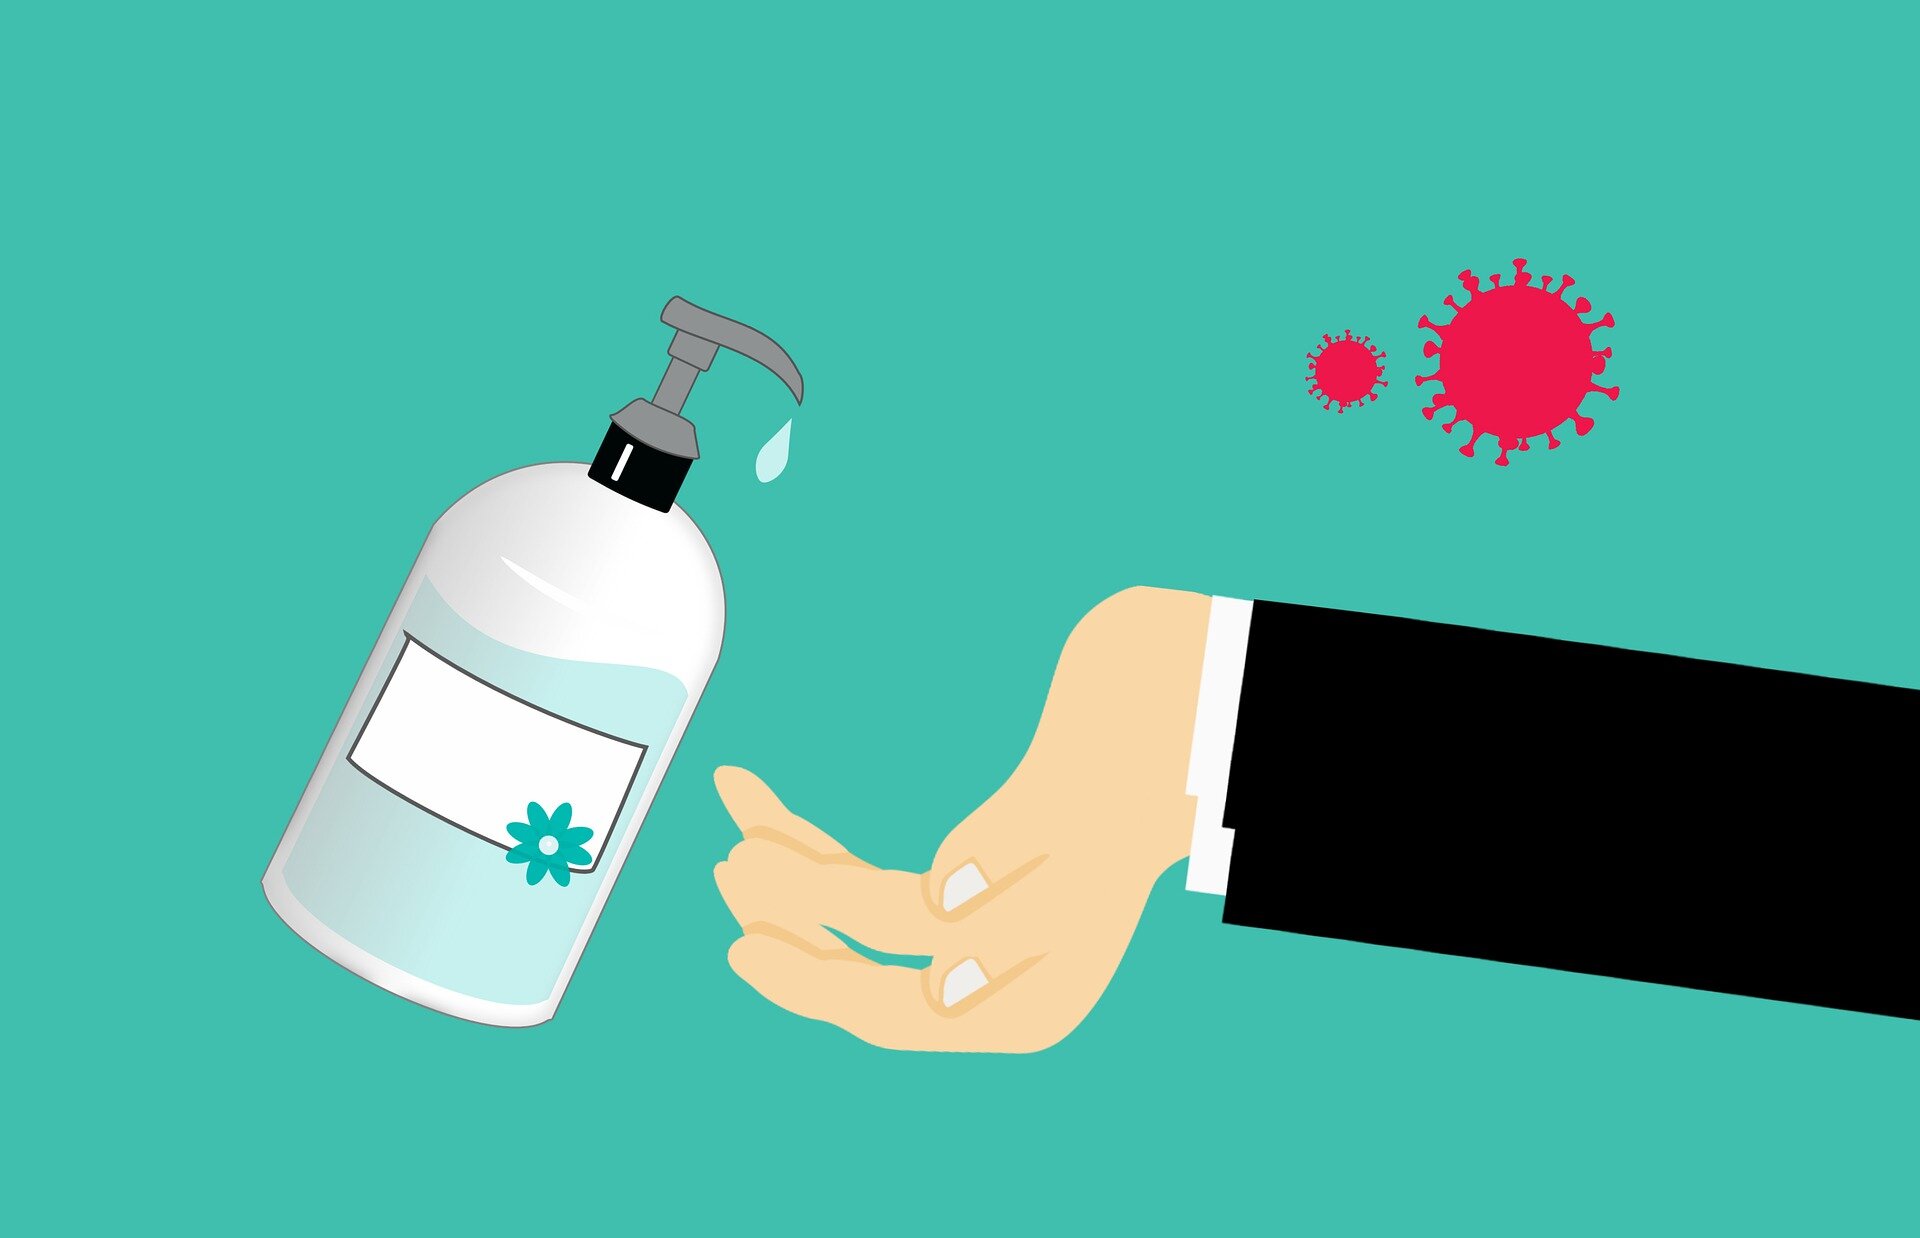 Alcoholfree hand sanitizer just as effective against